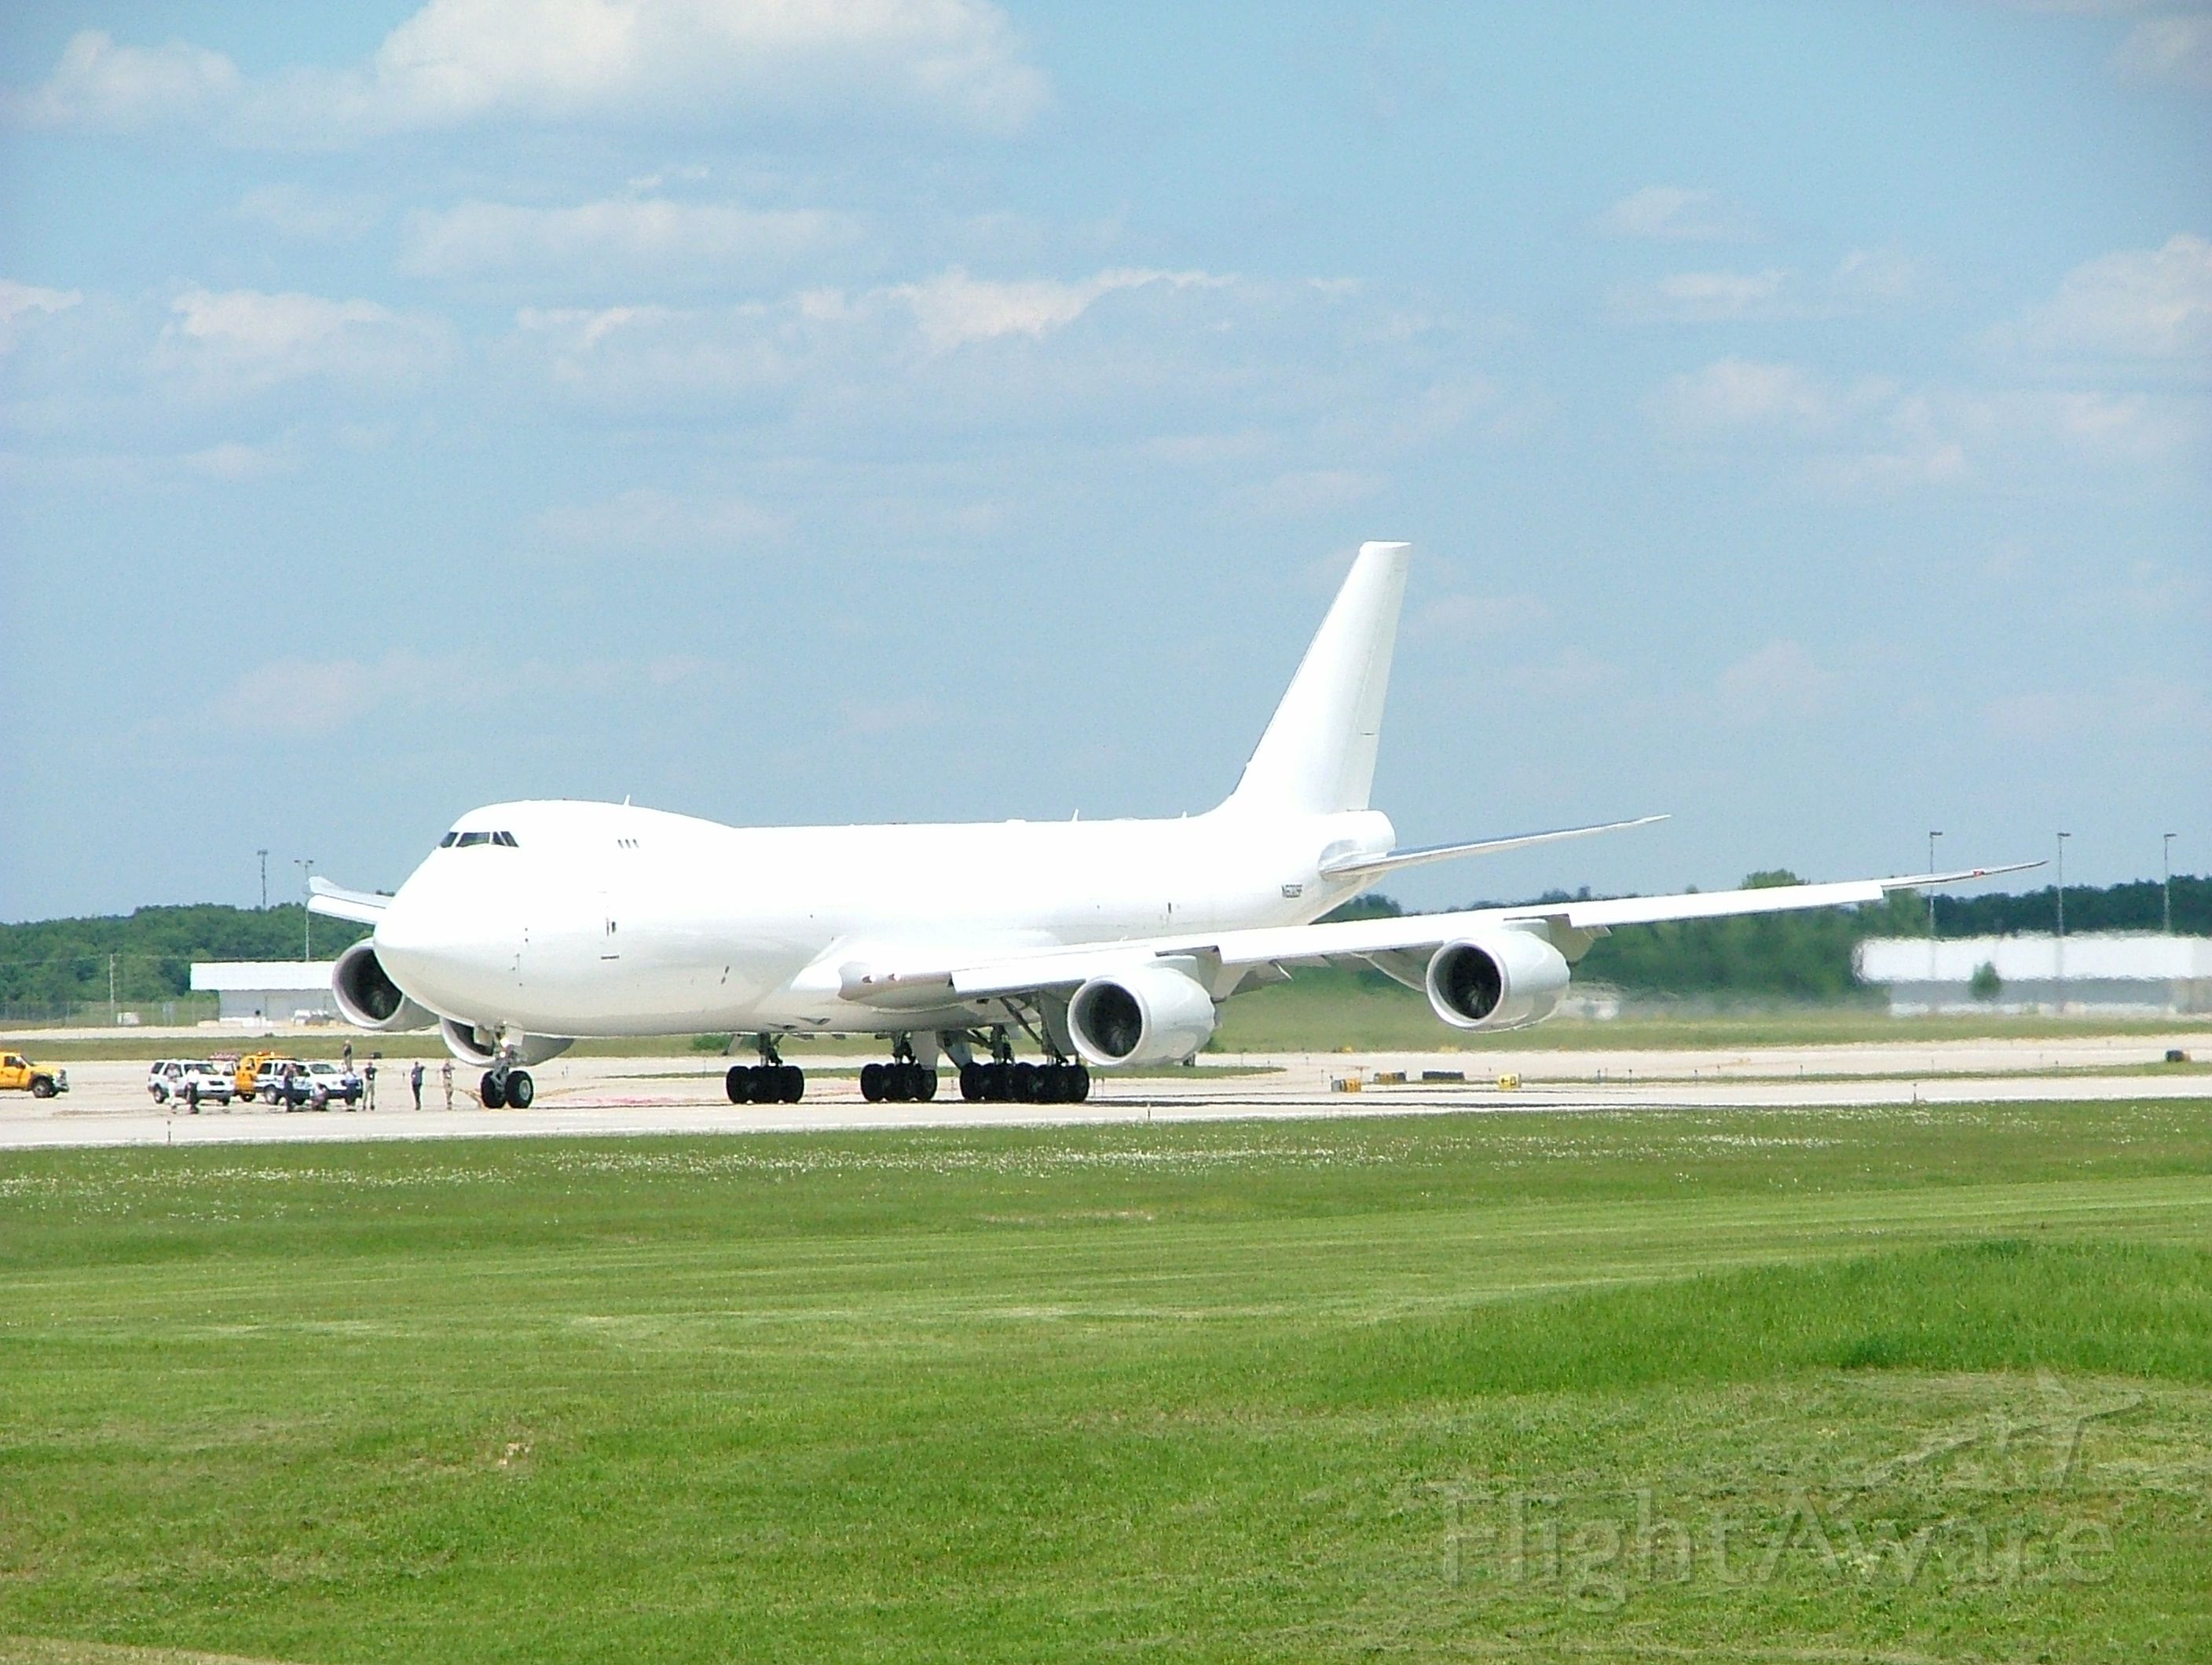 BOEING 747-8 (N6009F) - Rare shot of Boeing 747-8 landing at KGRR. Note airport personnel watching from taxiway.